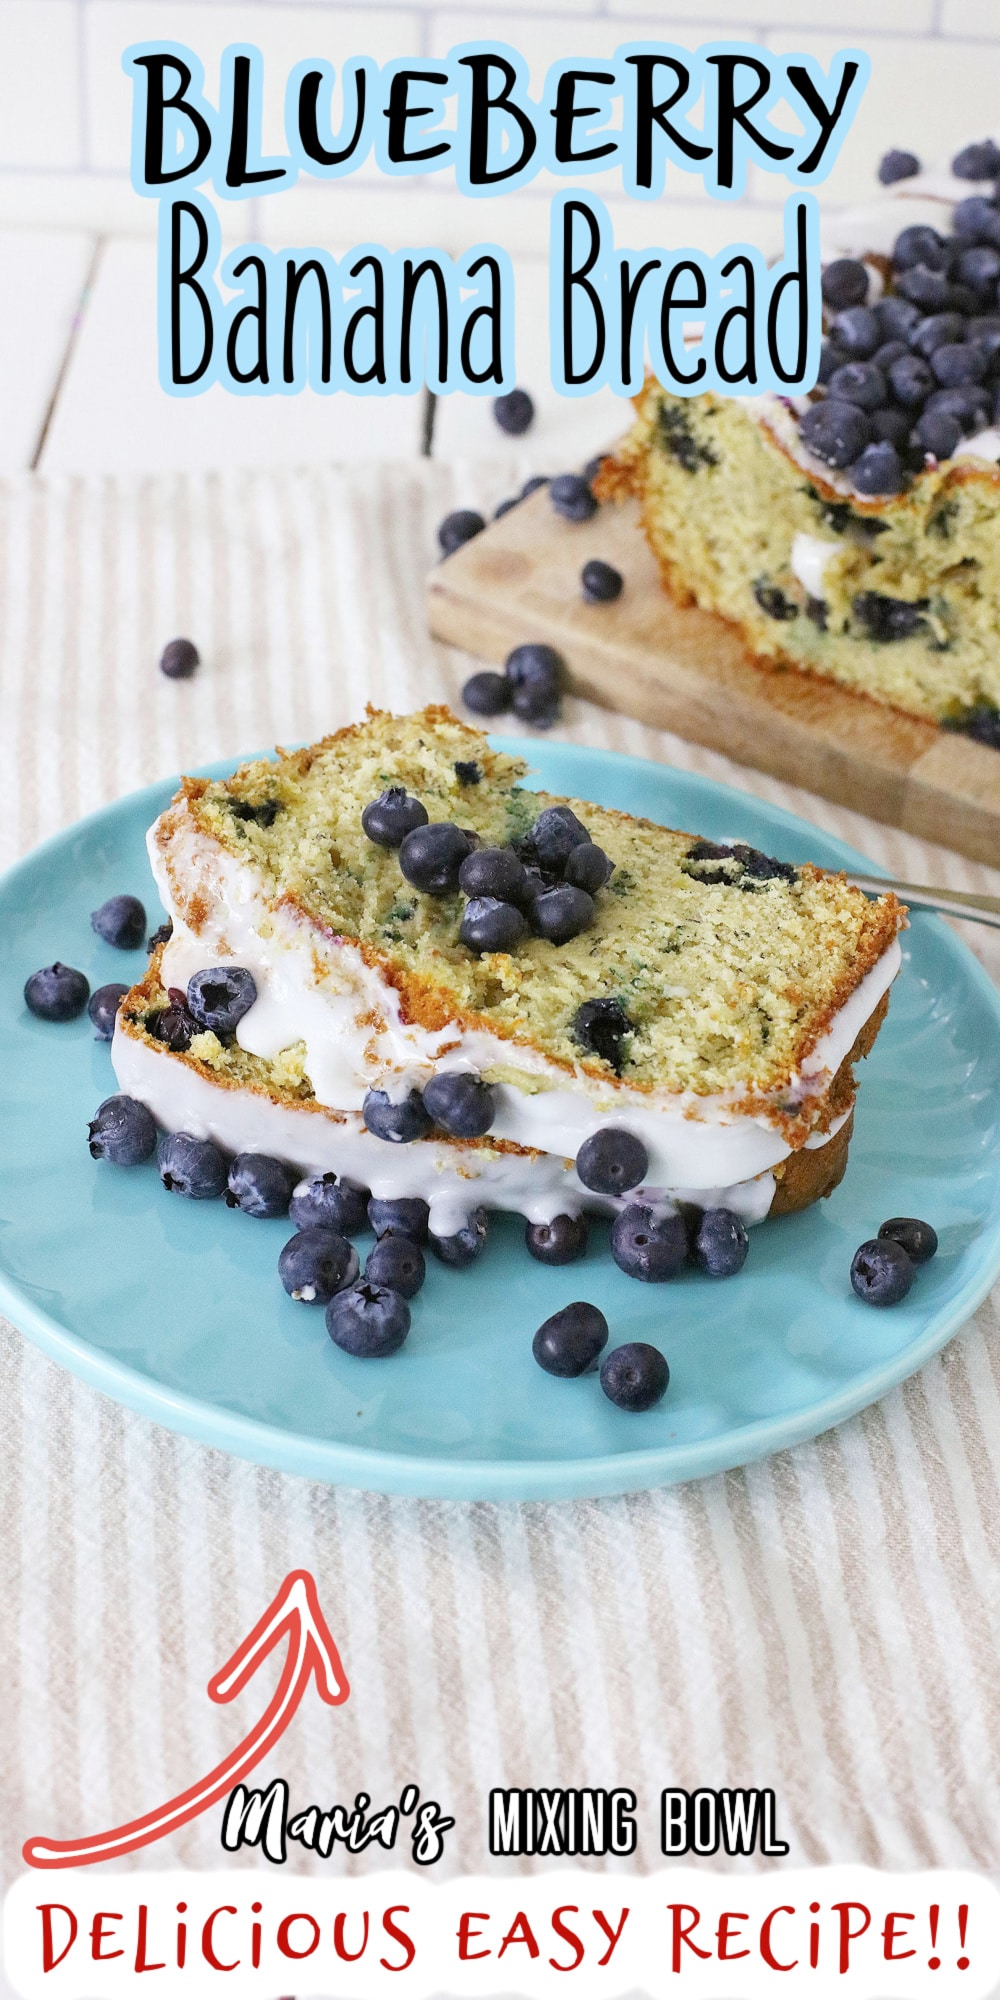 Pinterest image for blueberry banana bread with text